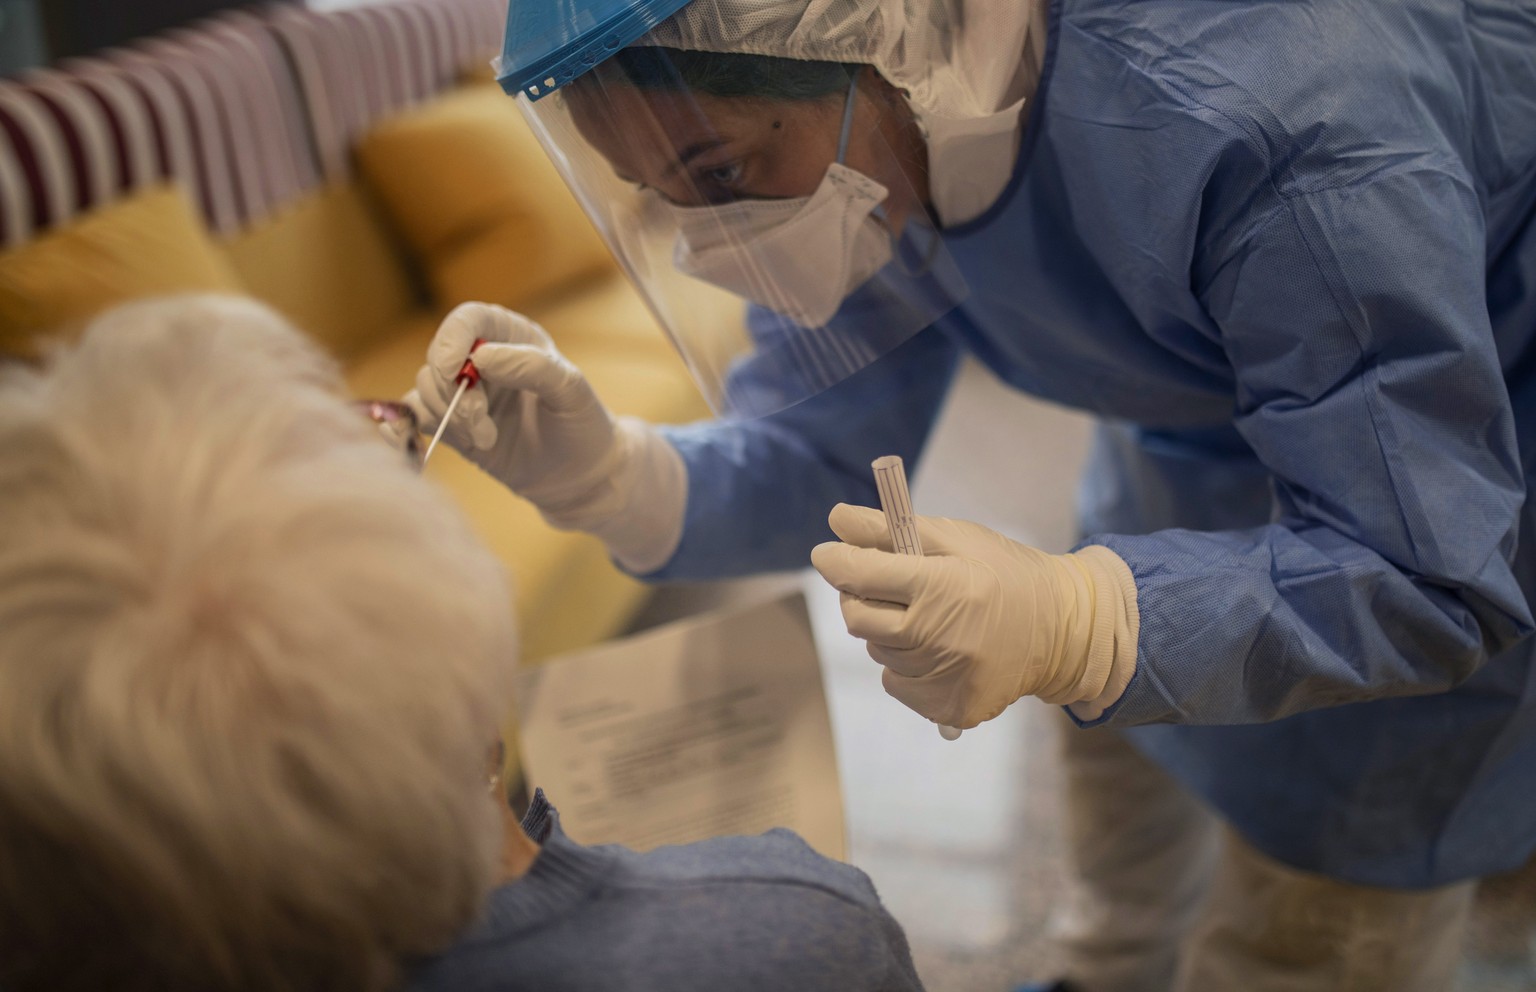 In this photo taken on Wednesday April 1, 2020, an aid worker from the Spanish NGO Open Arms carries out a coronavirus detection test on an elderly woman at a nursing home in Barcelona, Spain. The ini ...